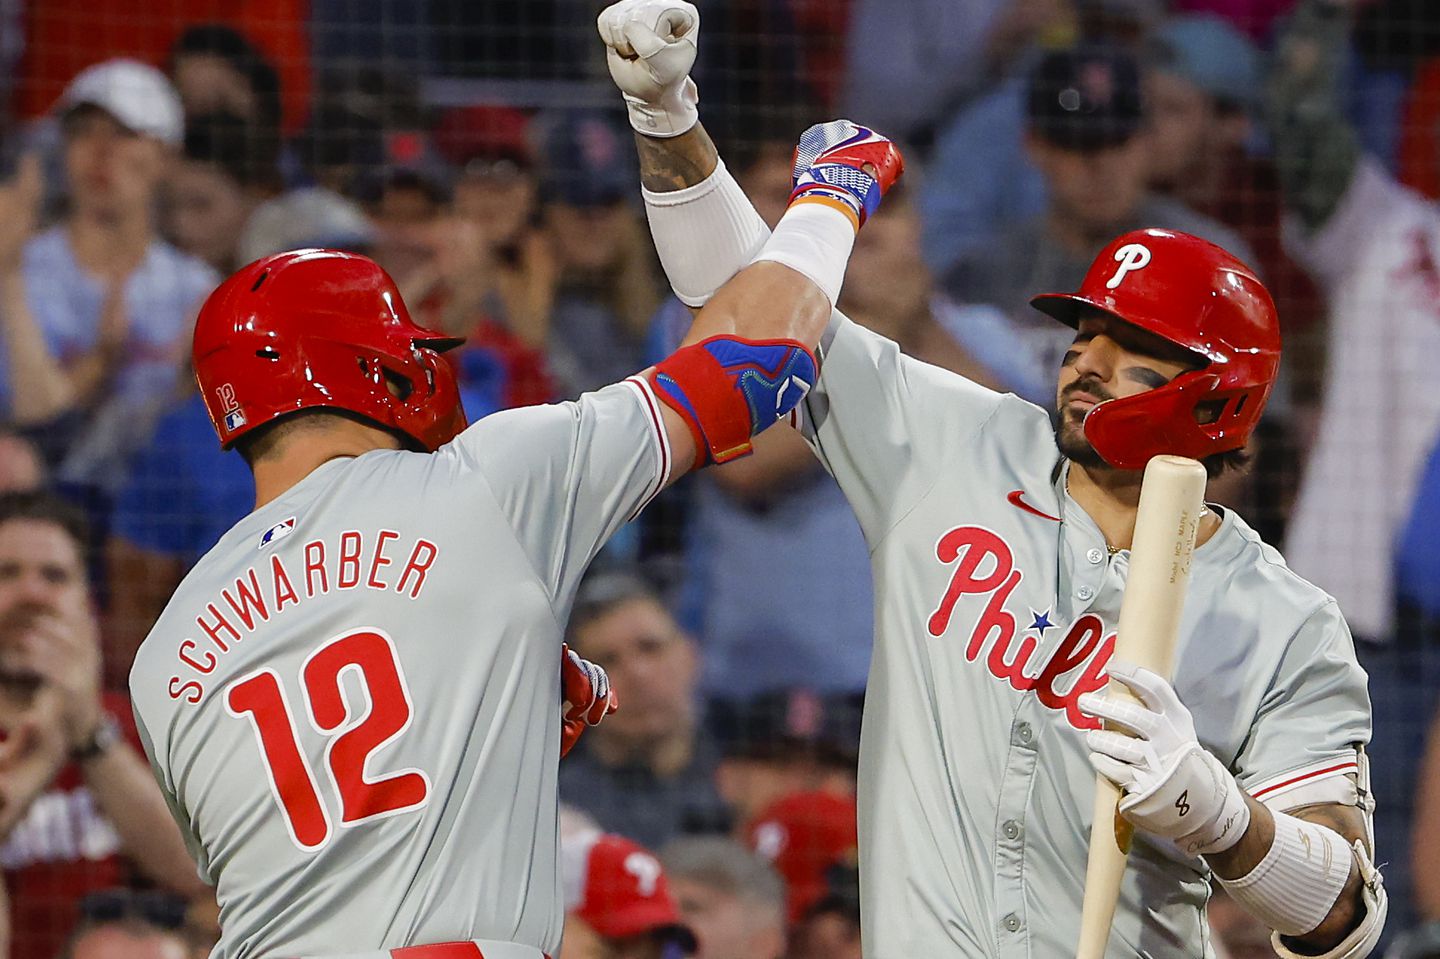 Kyle Schwarber celebrated with Phillies teammate Nick Castellanos in the fifth inning after blasting his second home run of the night.